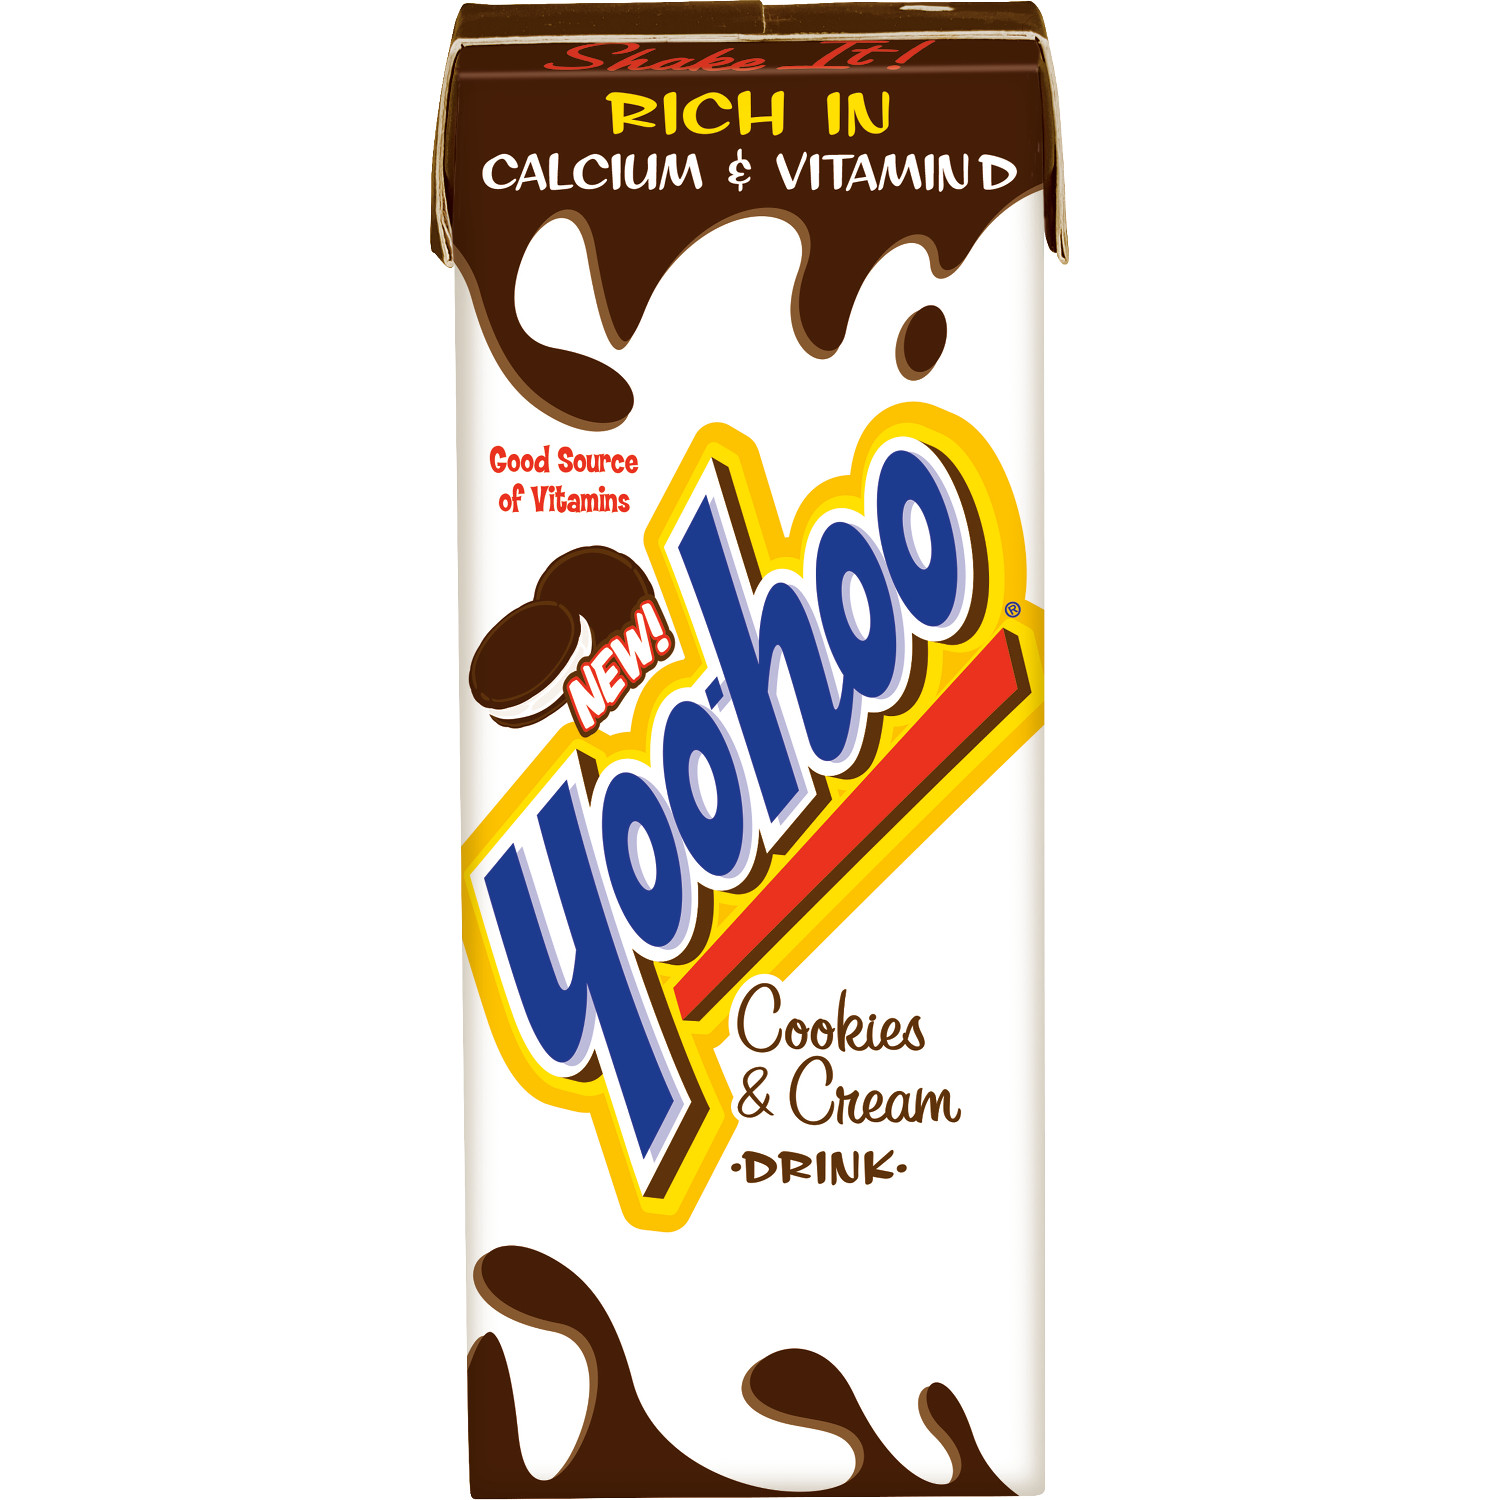 Yoo-hoo Cookies and Cream Drink, 6.5 Fl Oz Boxes, 10 Count (Pack of 4) - image 2 of 10